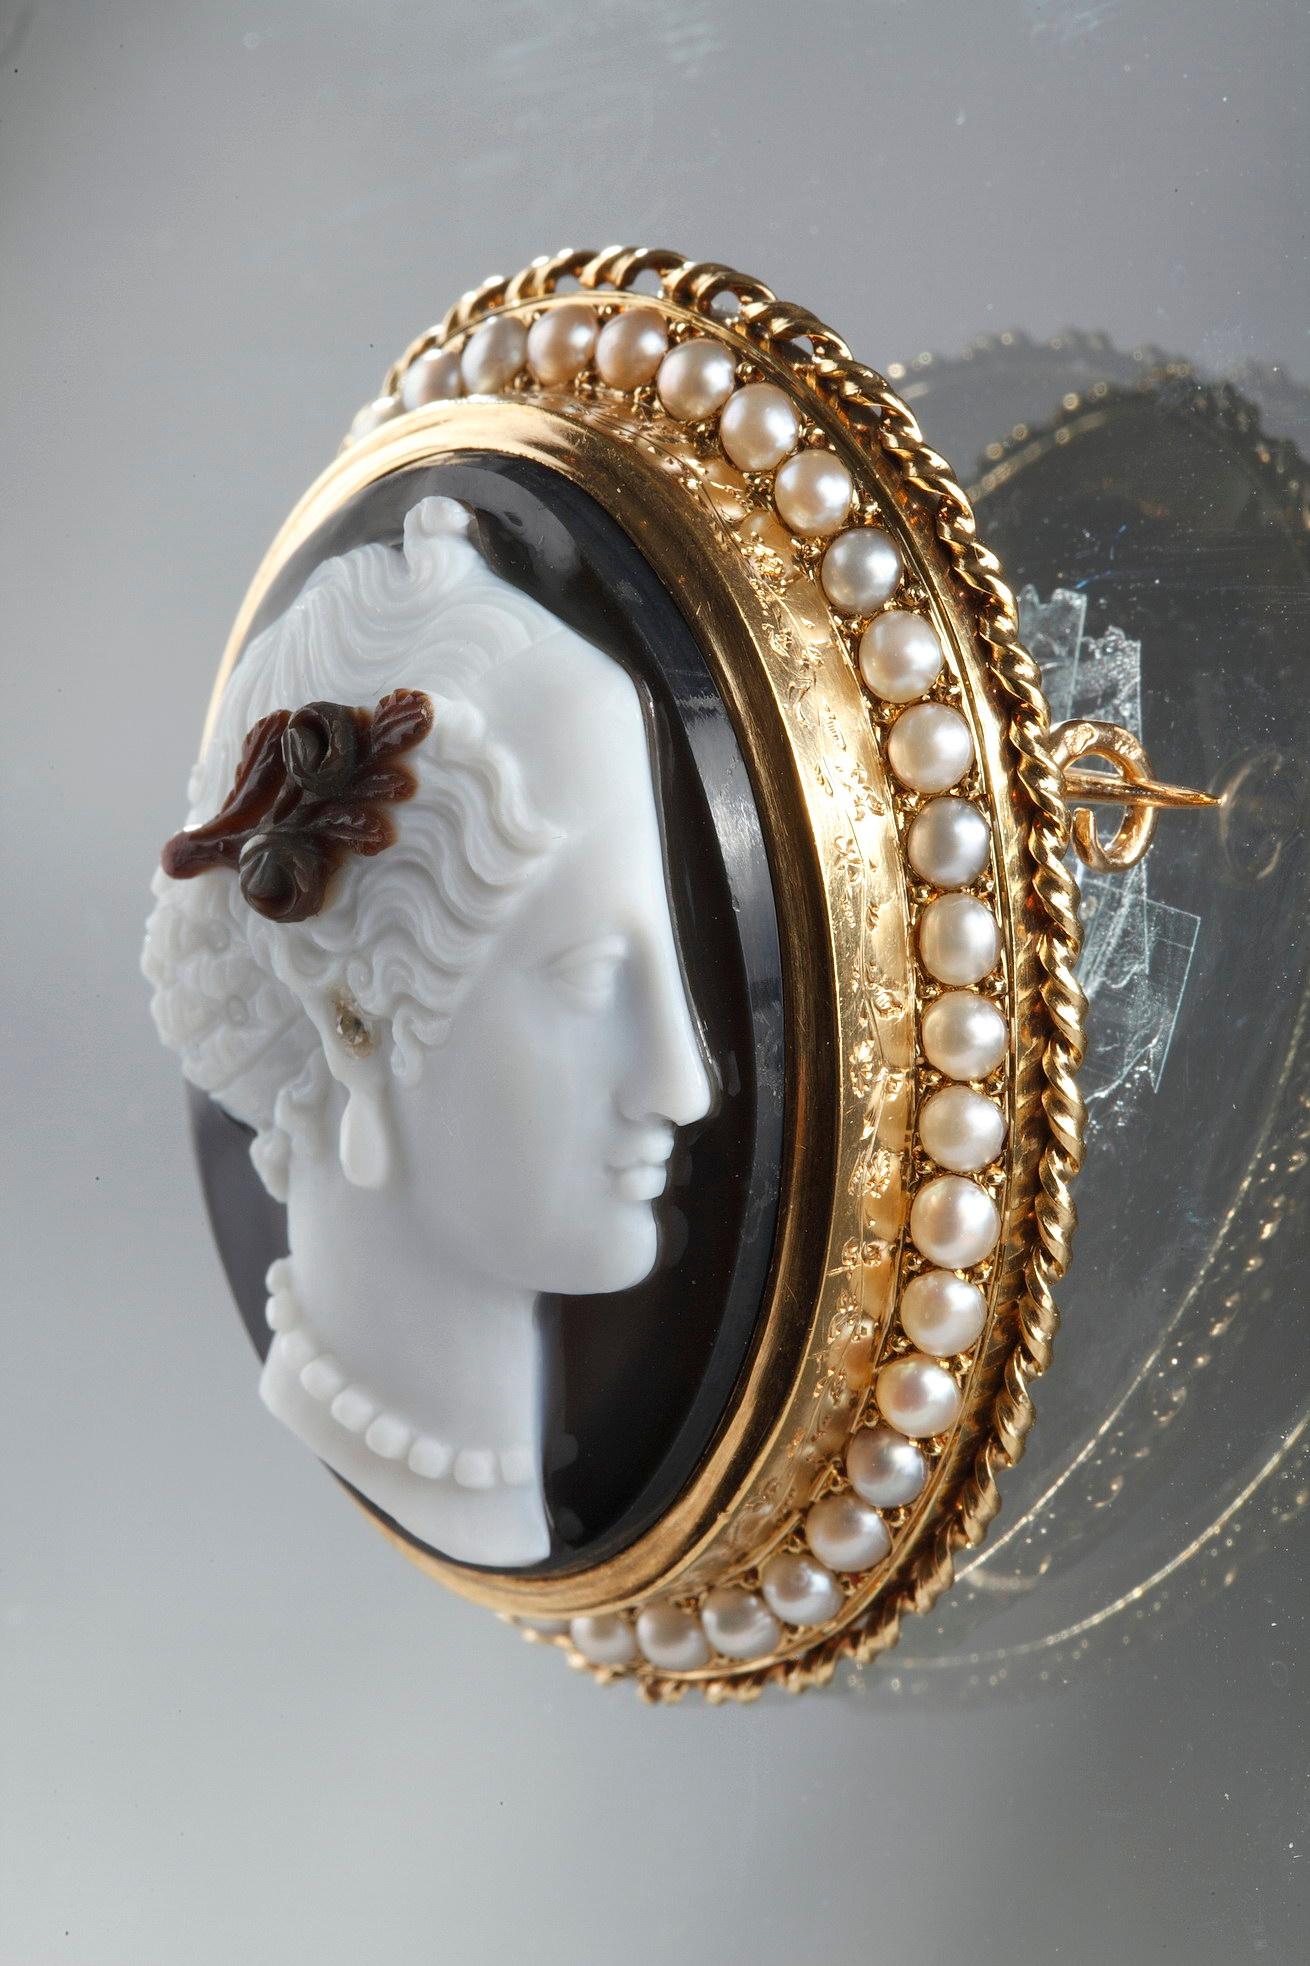 Gold-Mounted Agate Cameo Brooch, Second Part of the 19th Century, Napoleon III 6